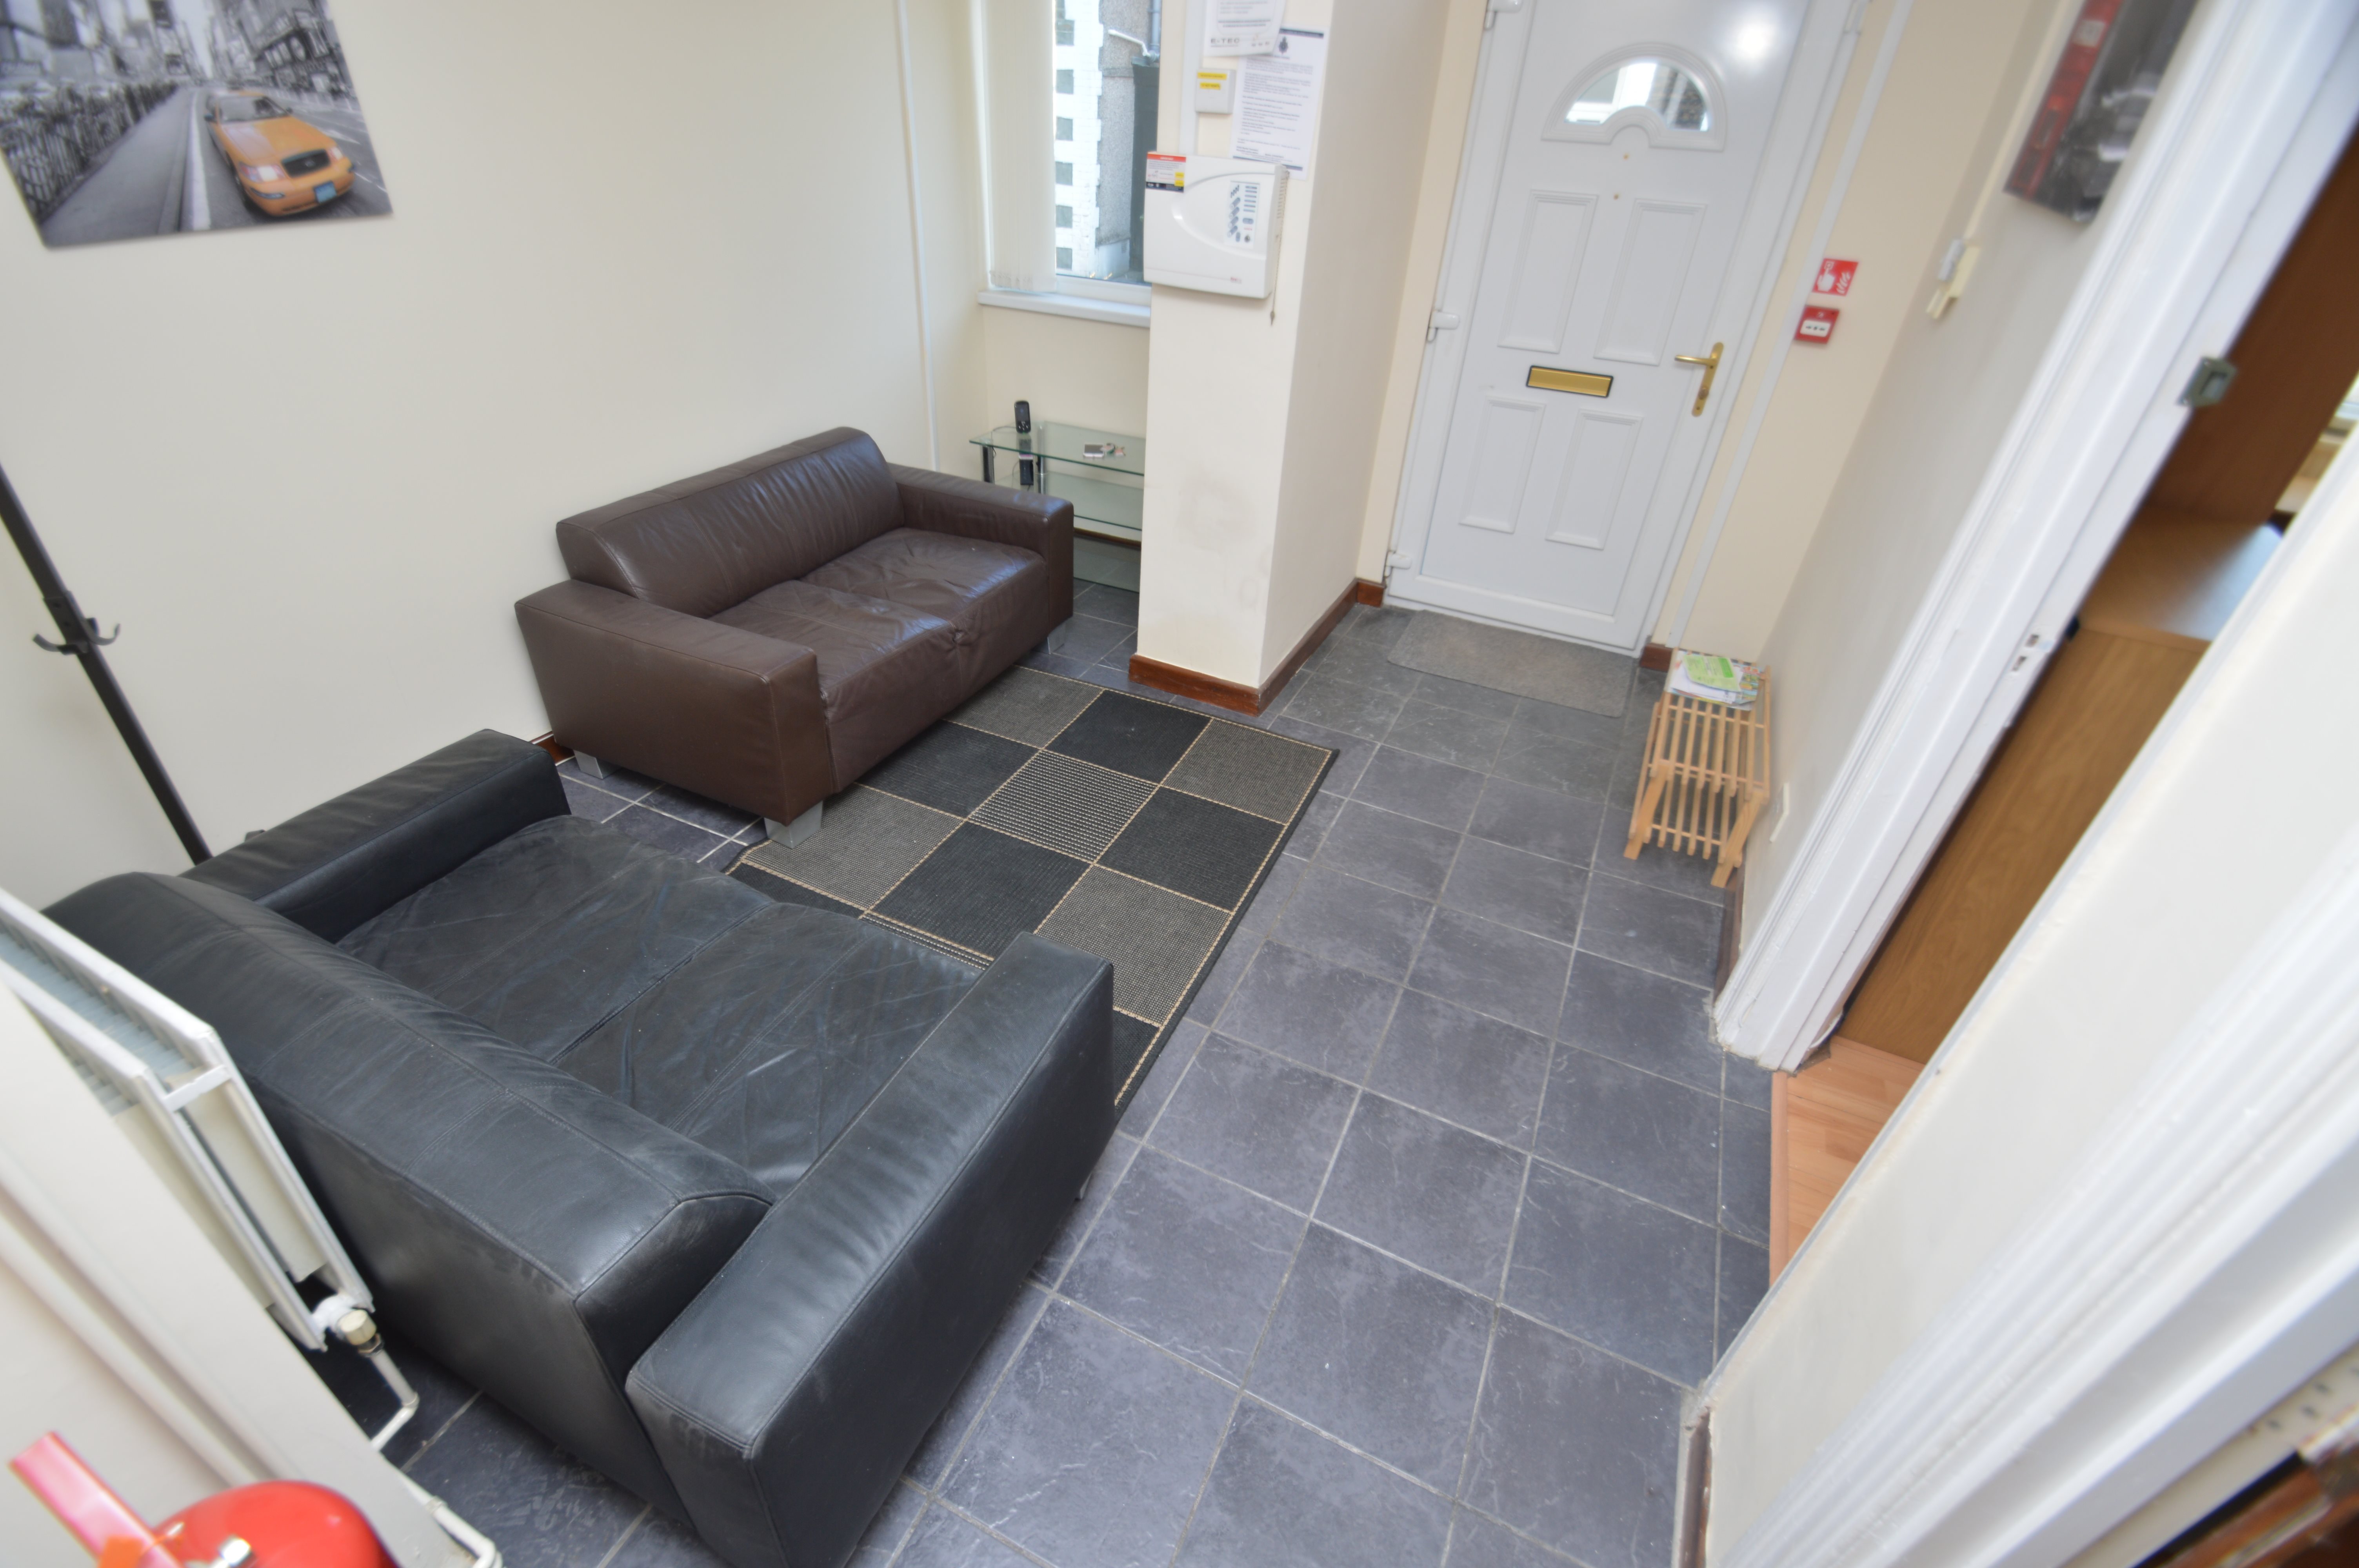 1 bed house / flat share to rent in Wood Road , Treforest   - Property Image 2